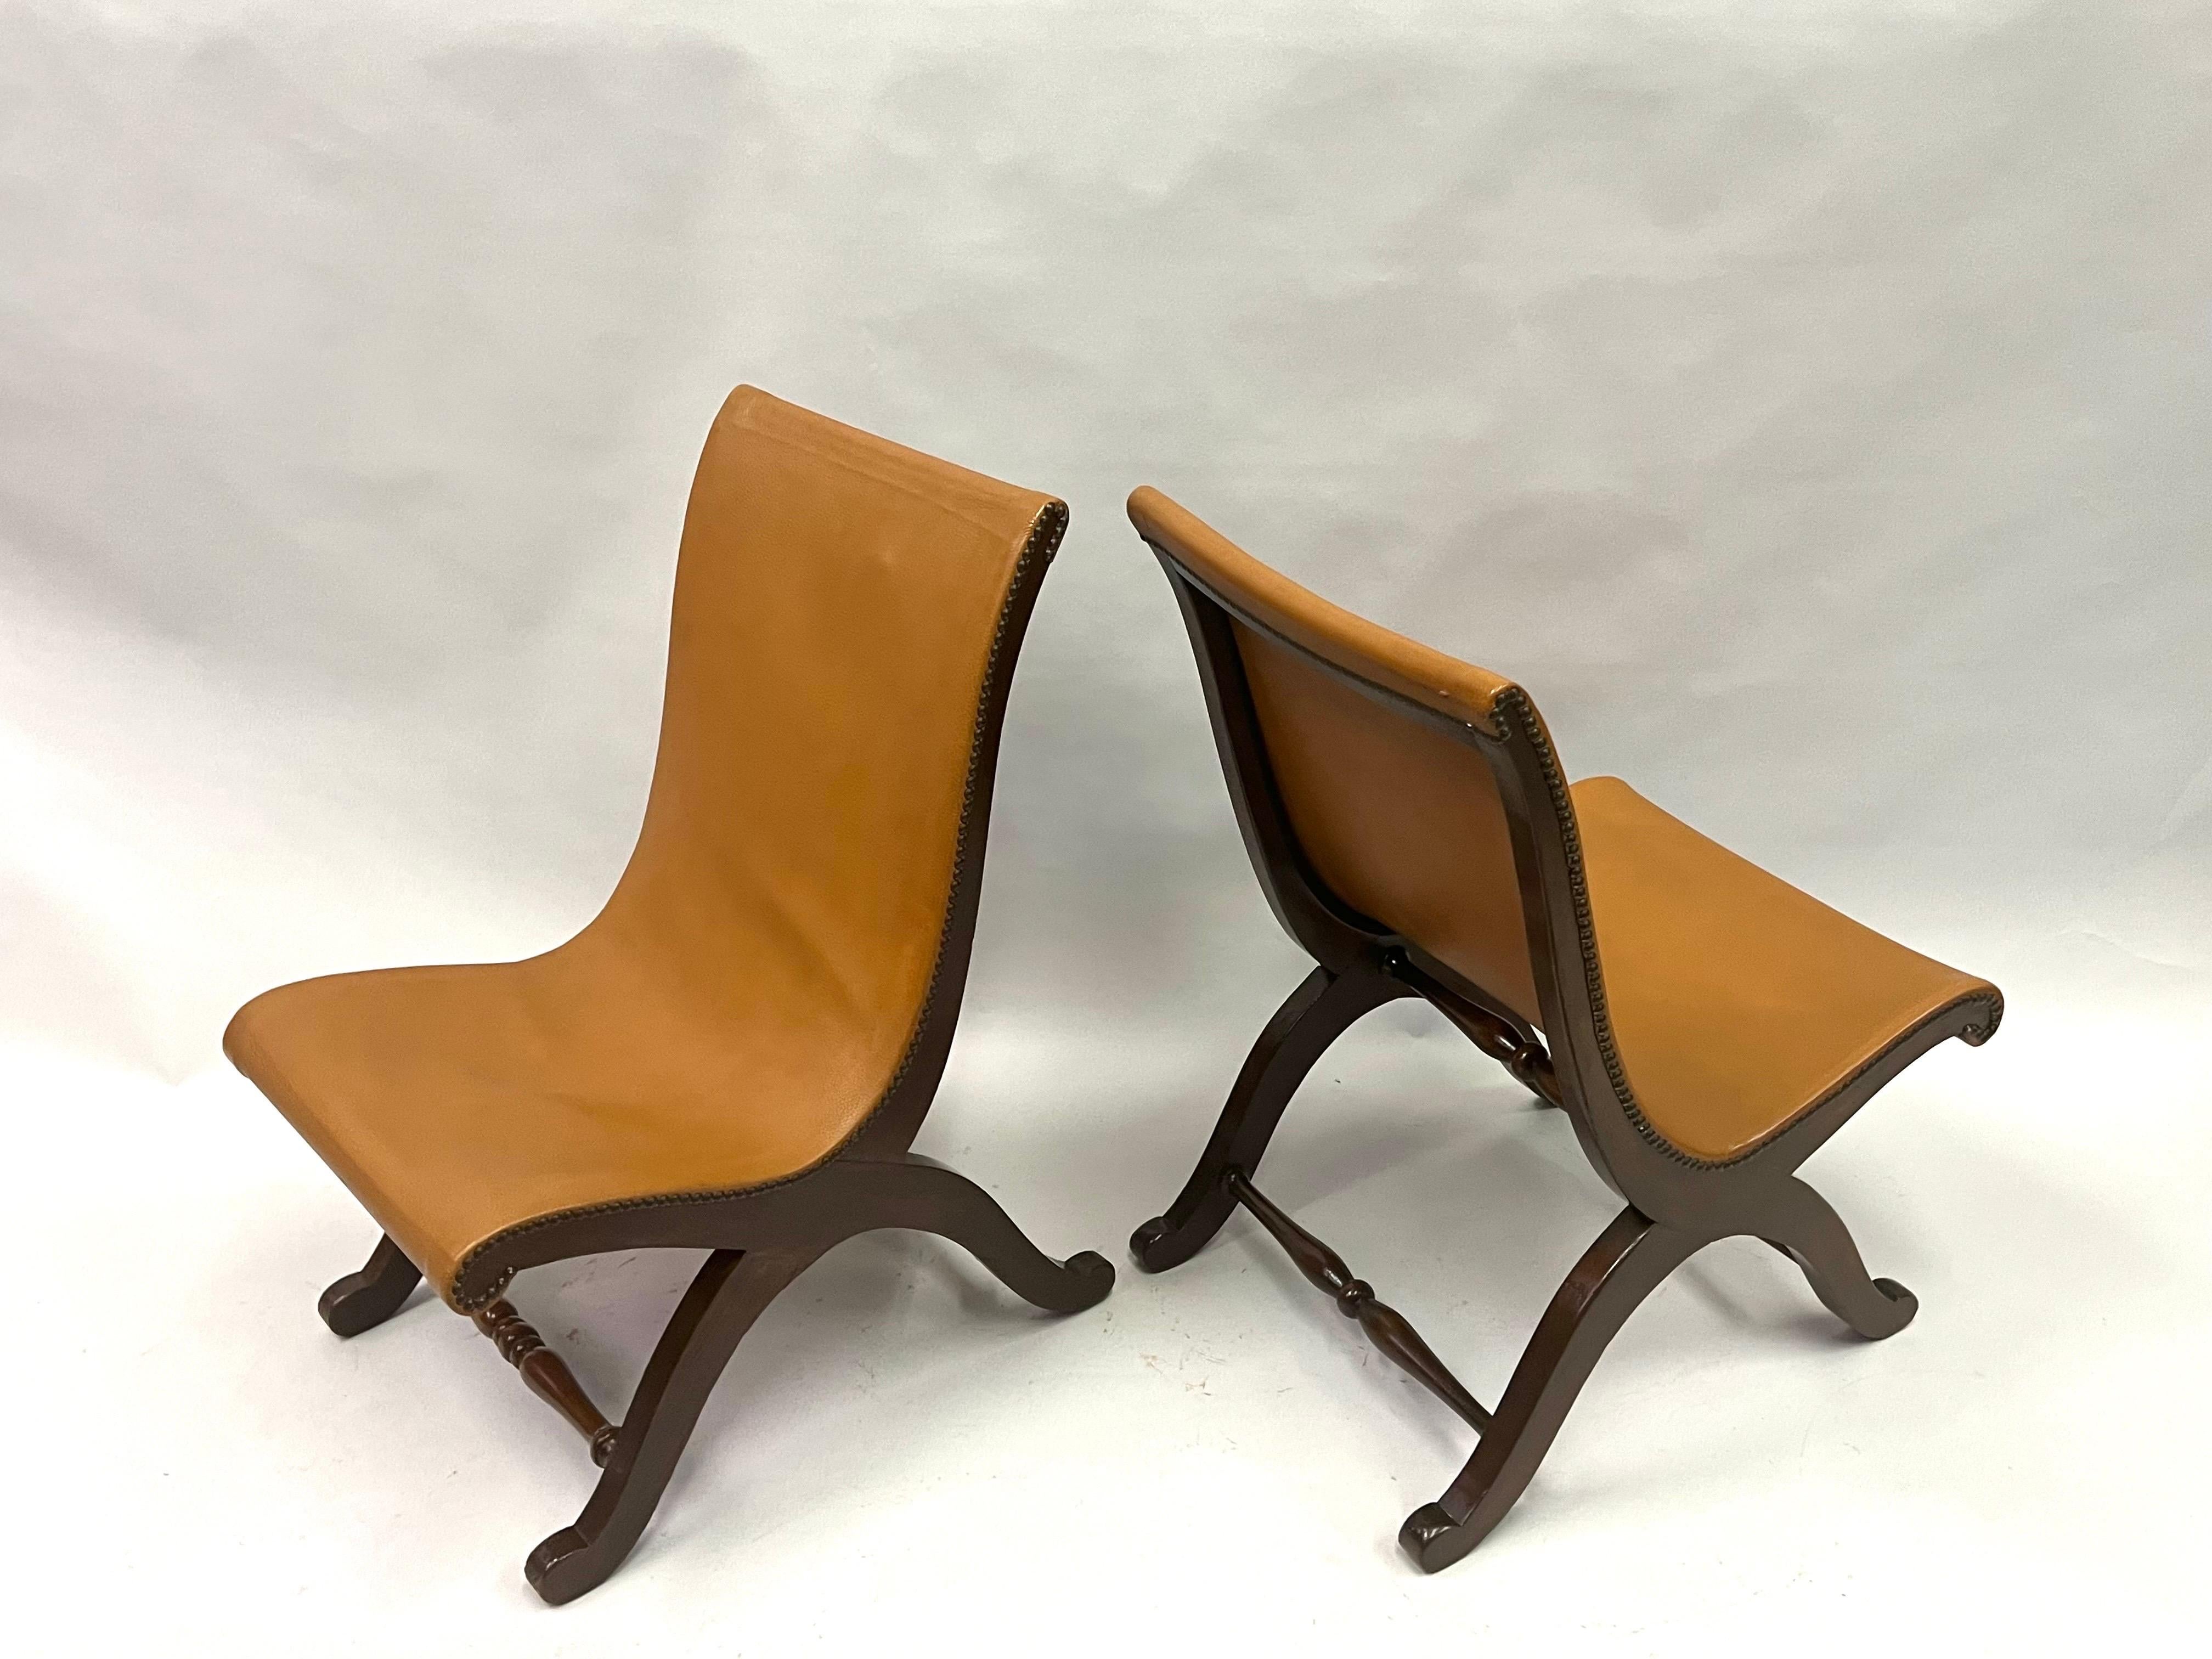 An Elegant and Timeless Pair of French Mid-Century Modern Neoclassical Lounge or Slipper Chairs in a solid hardwood frame and covered in a glove-like leather. These chairs are derived from neoclassical design ideas that are several centuries old.